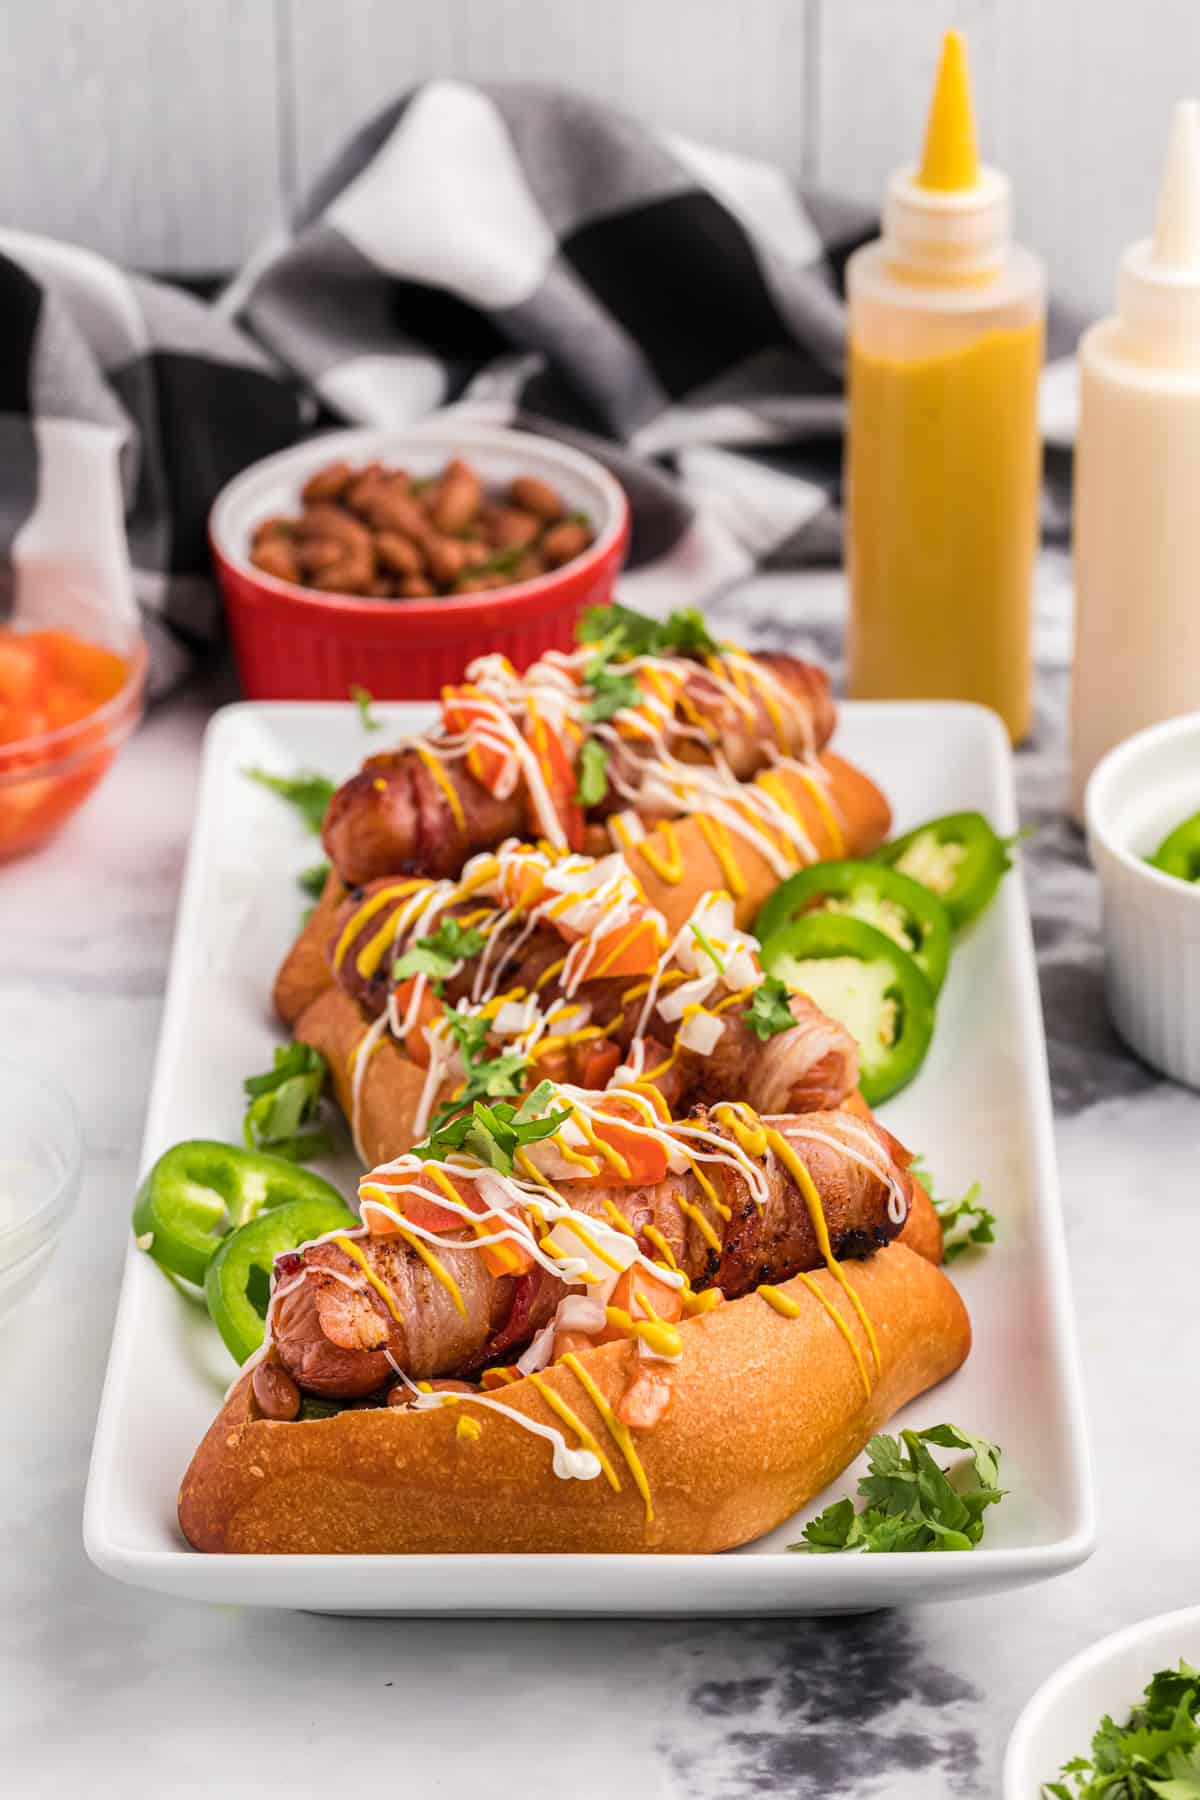 Several hot dogs are placed on a white serving plate.